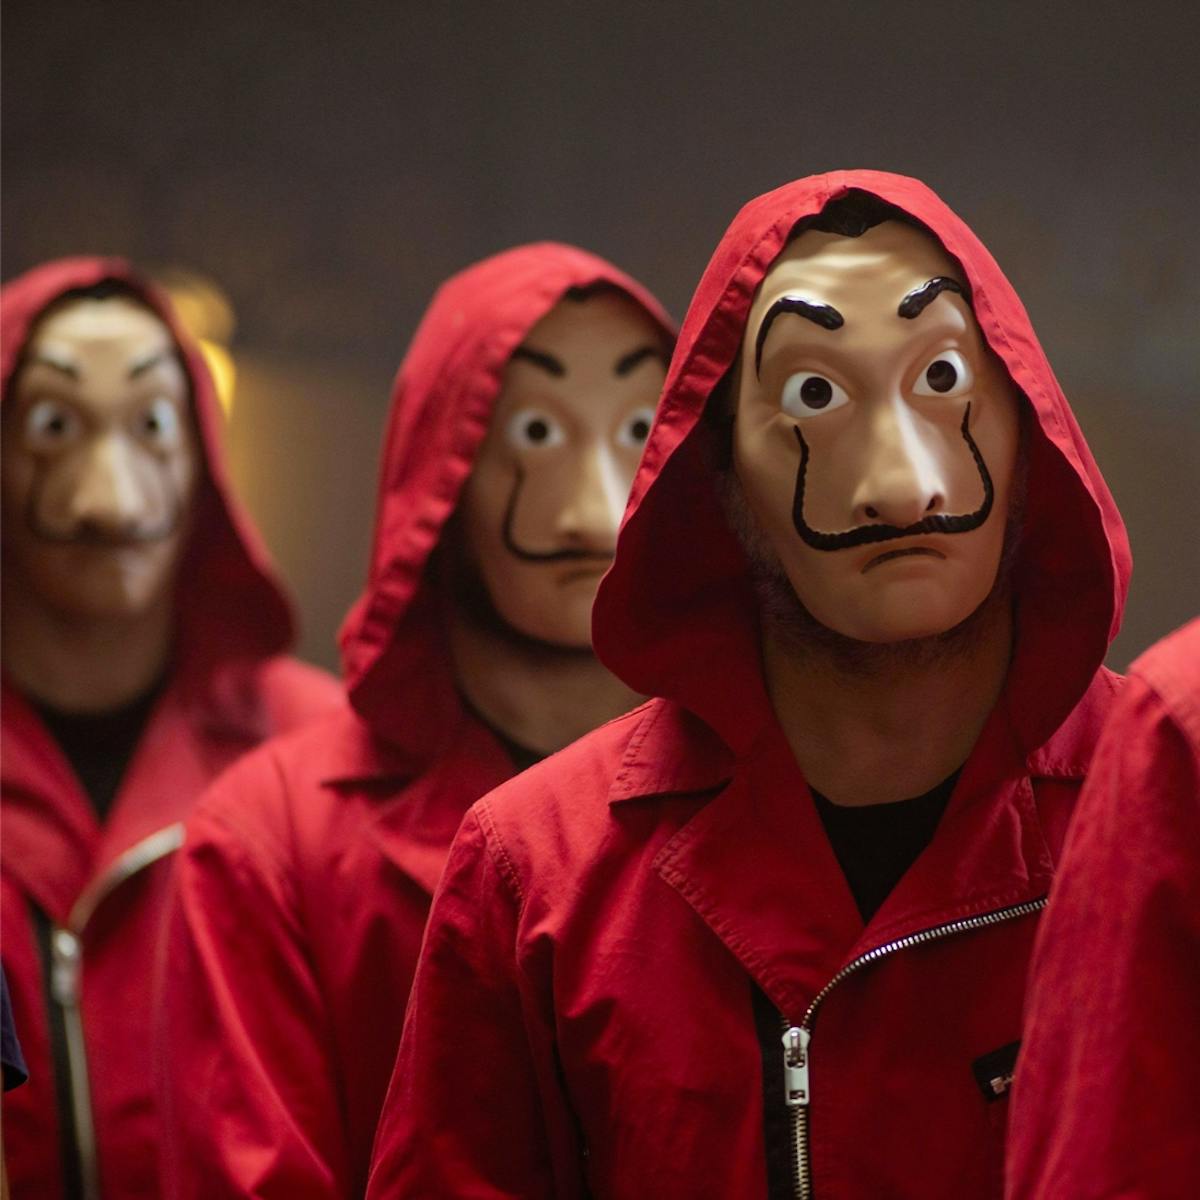 People in red jackets wearing masks walk in a line. They have dark eyebrows and mustaches, and alarmed expressions.